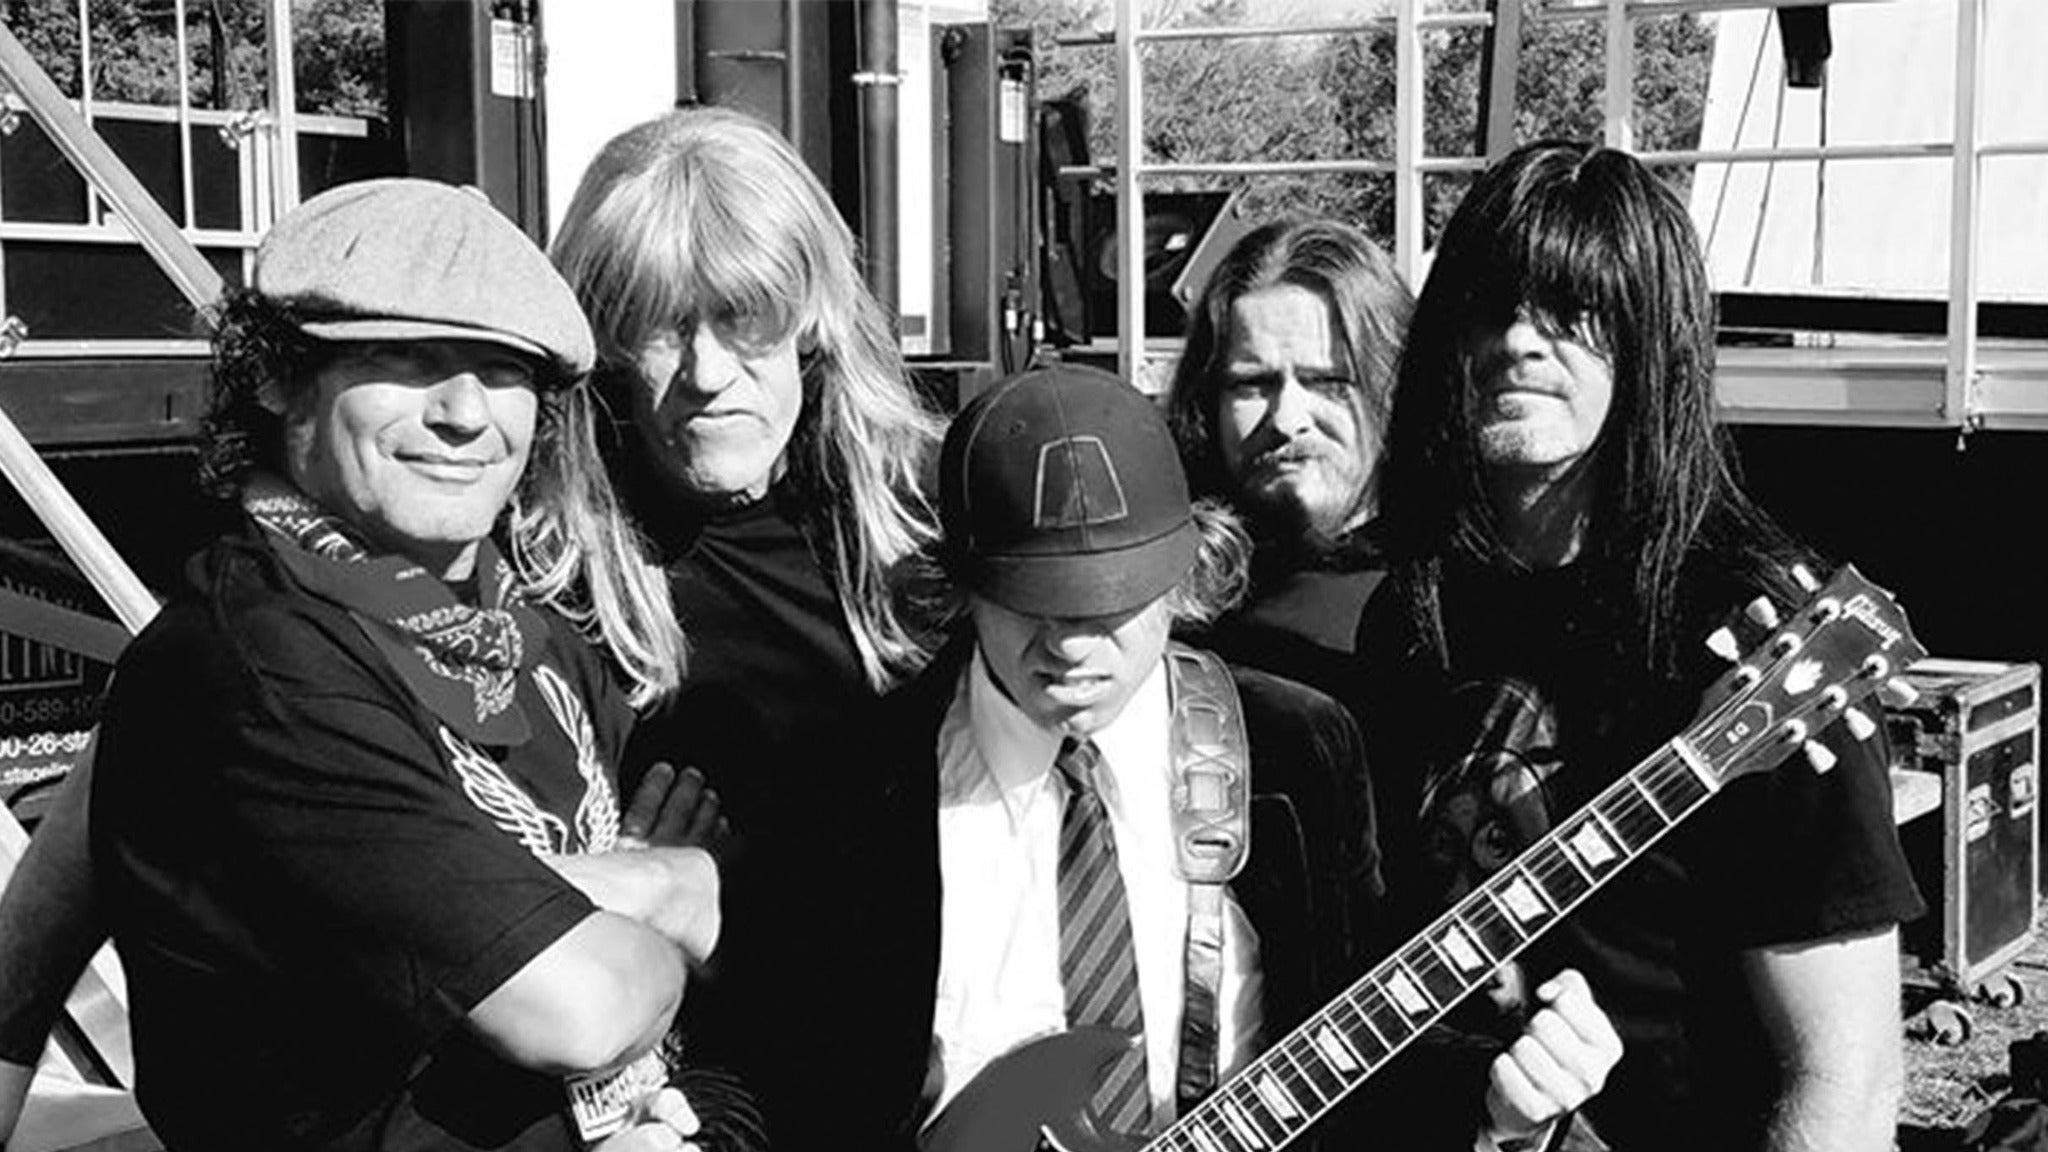 Noise Pollution - The Ac/dc Experience in Winnipeg promo photo for Venue presale offer code